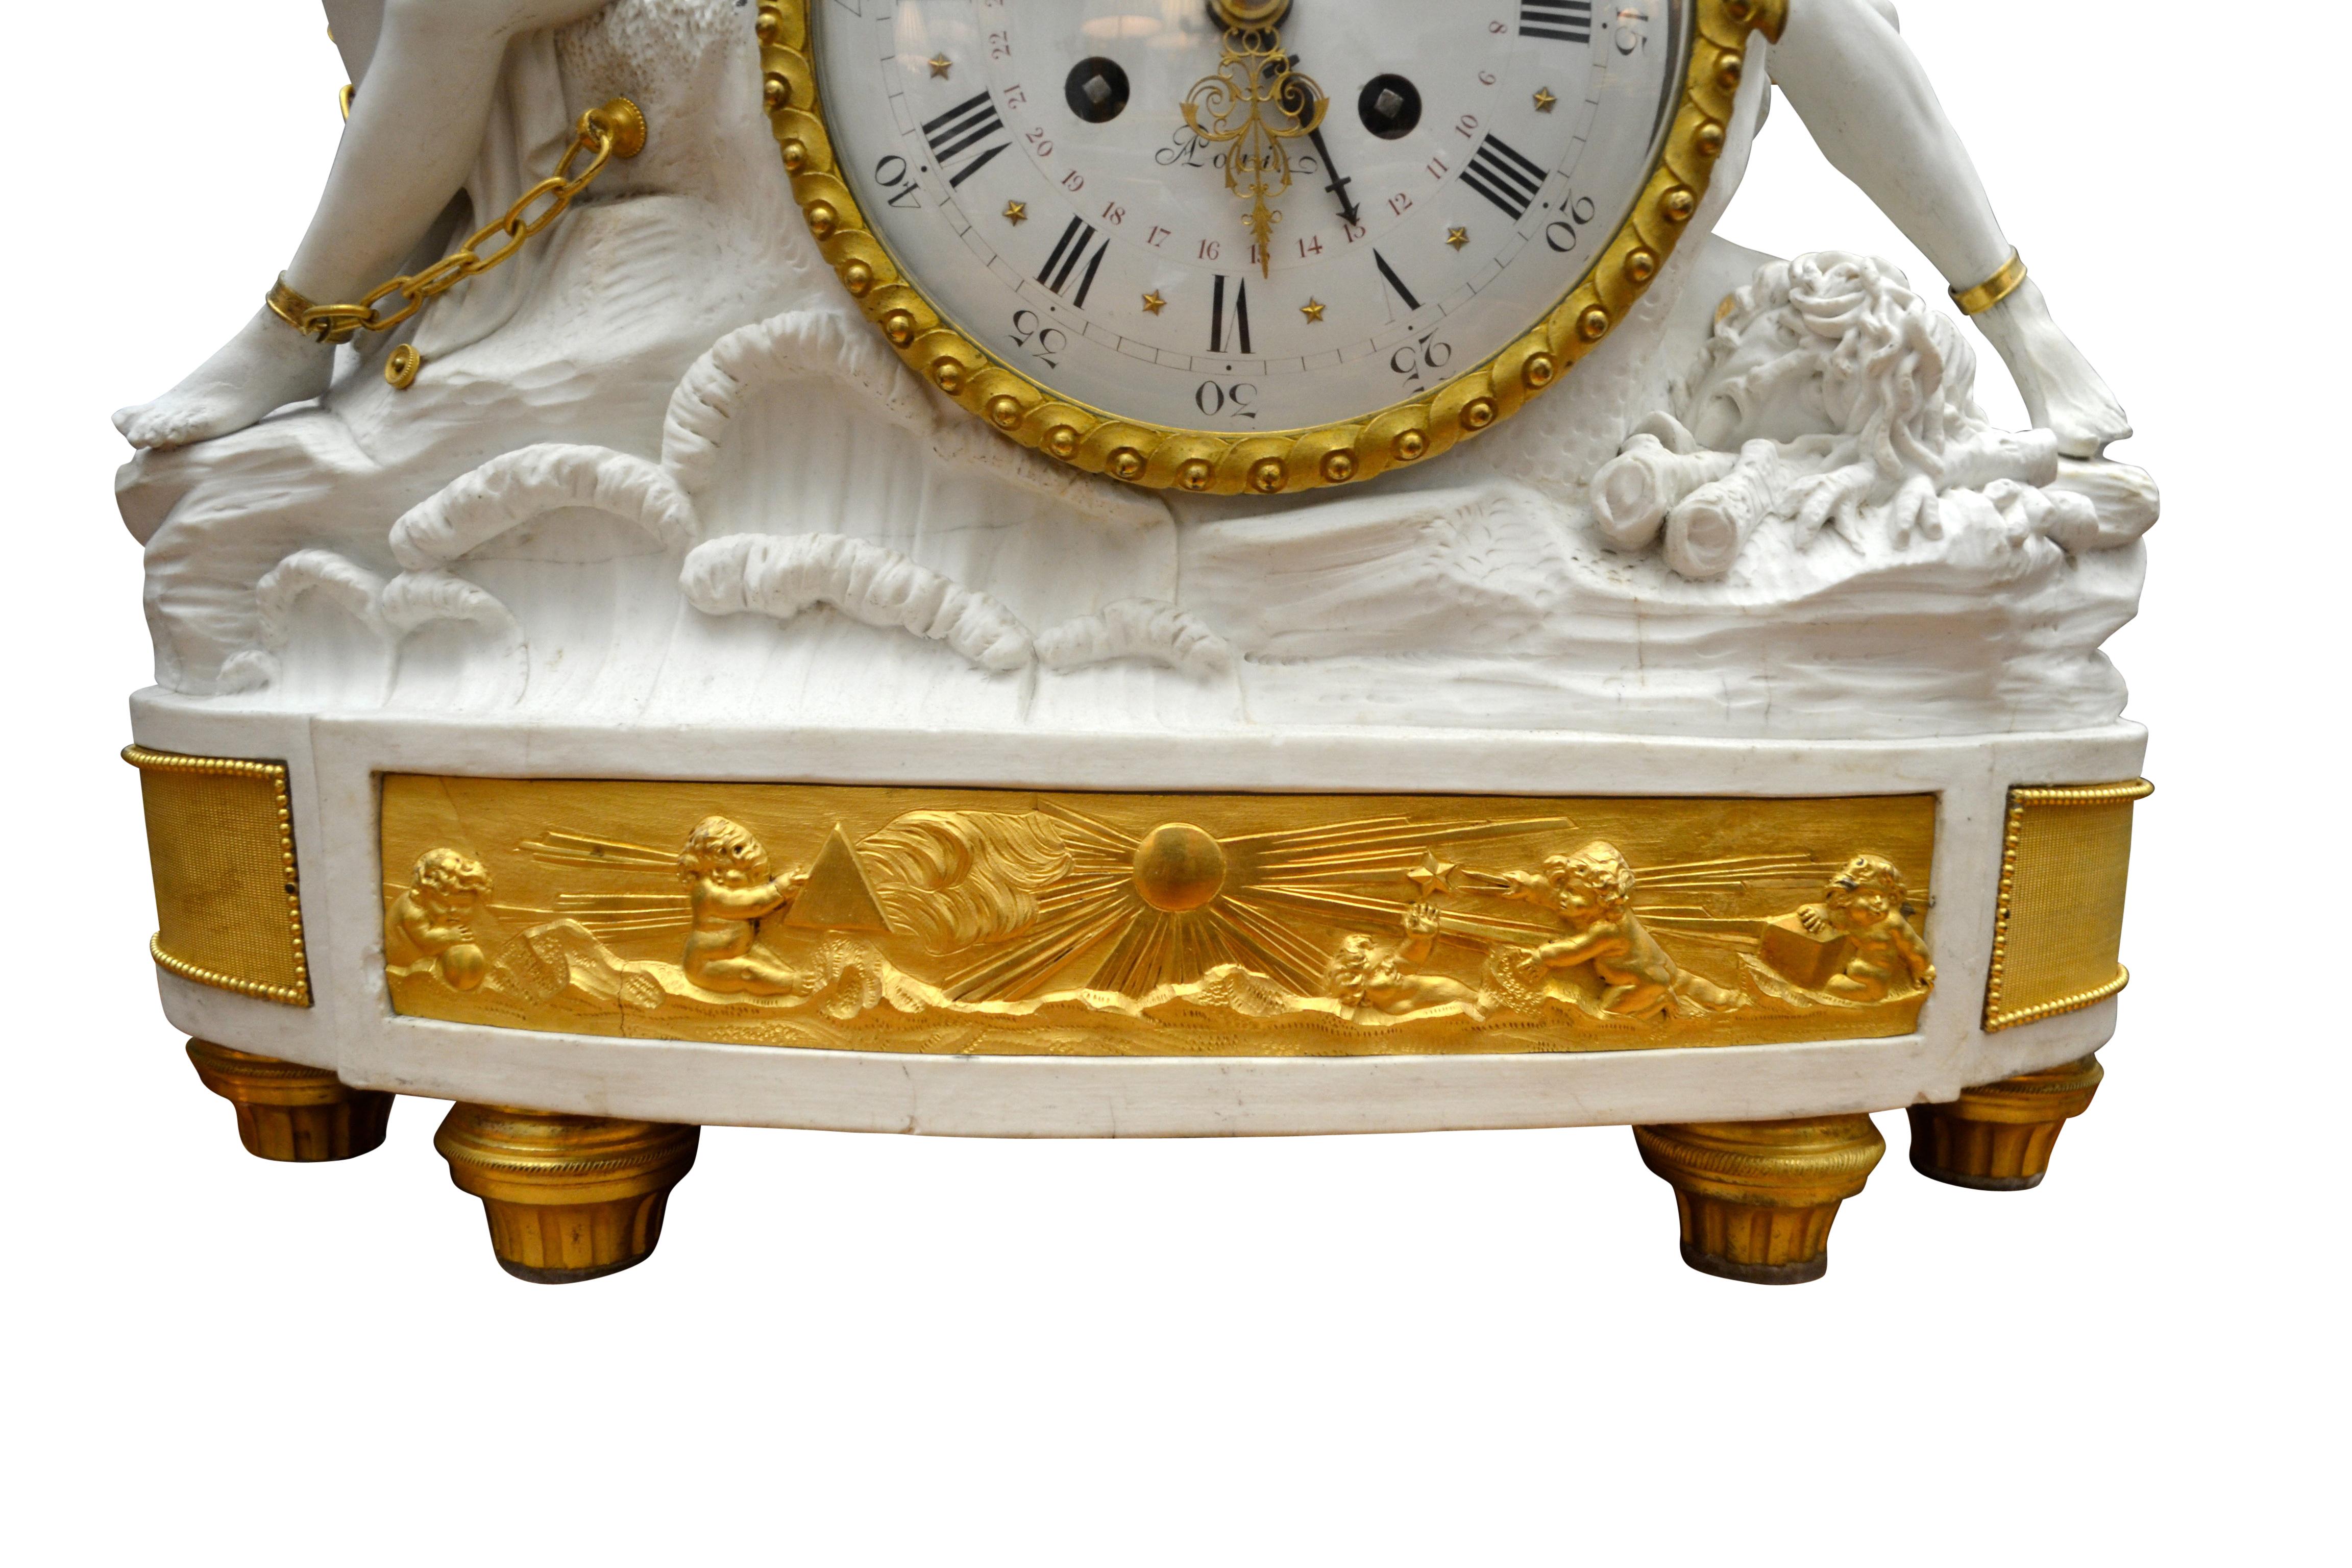 Bisquit Porcelain and Gilt Bronze Figural Clock of Perseus Freeing Andromeda For Sale 1